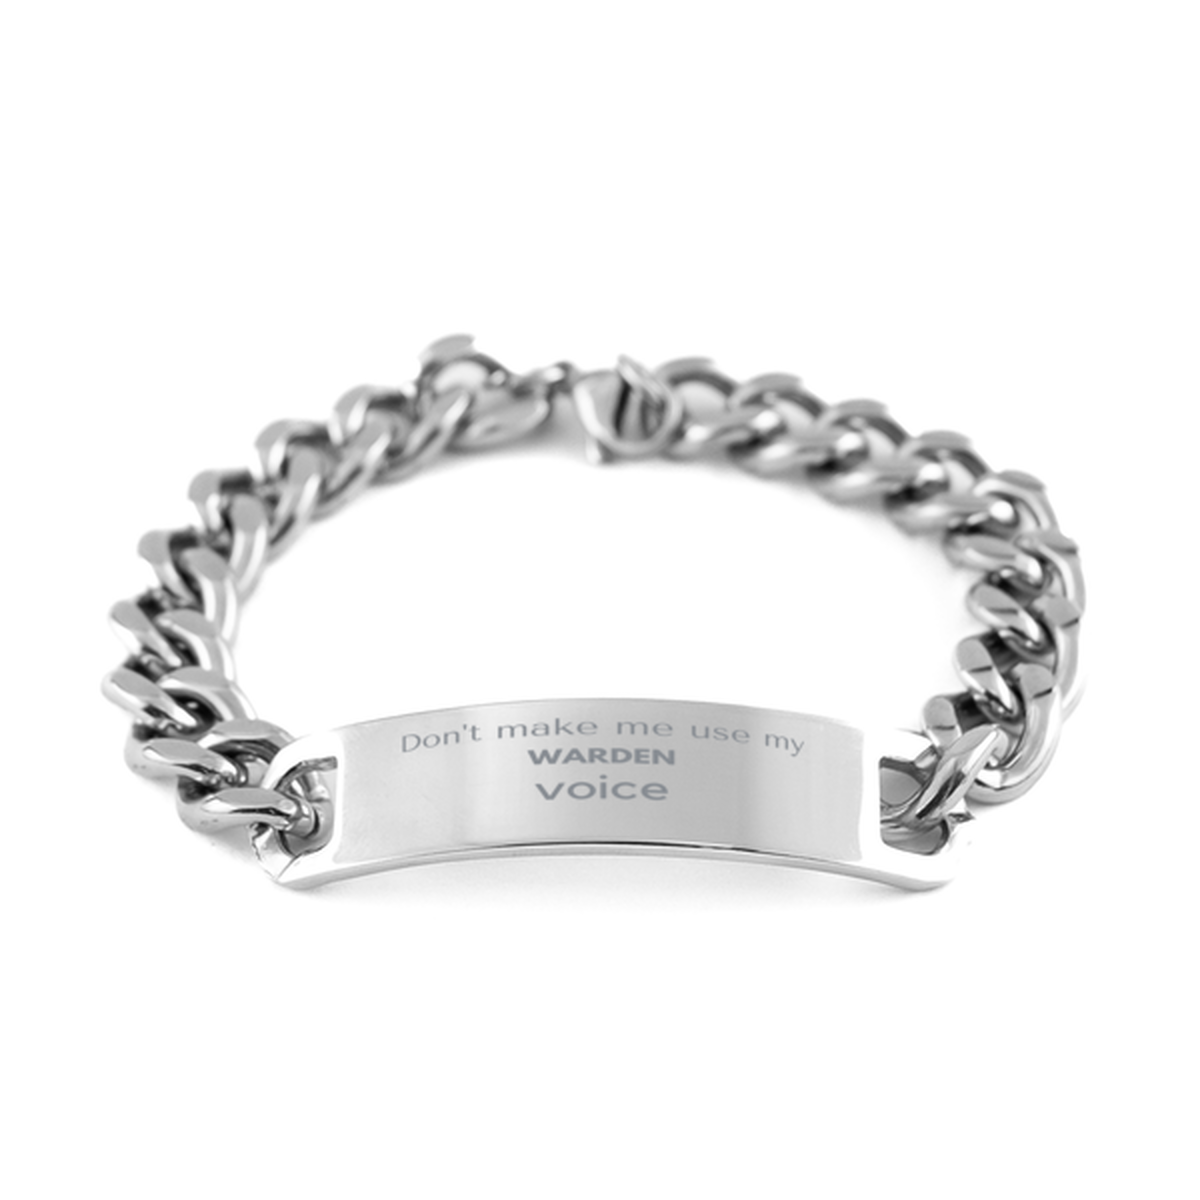 Don't make me use my Warden voice, Sarcasm Warden Gifts, Christmas Warden Cuban Chain Stainless Steel Bracelet Birthday Unique Gifts For Warden Coworkers, Men, Women, Colleague, Friends